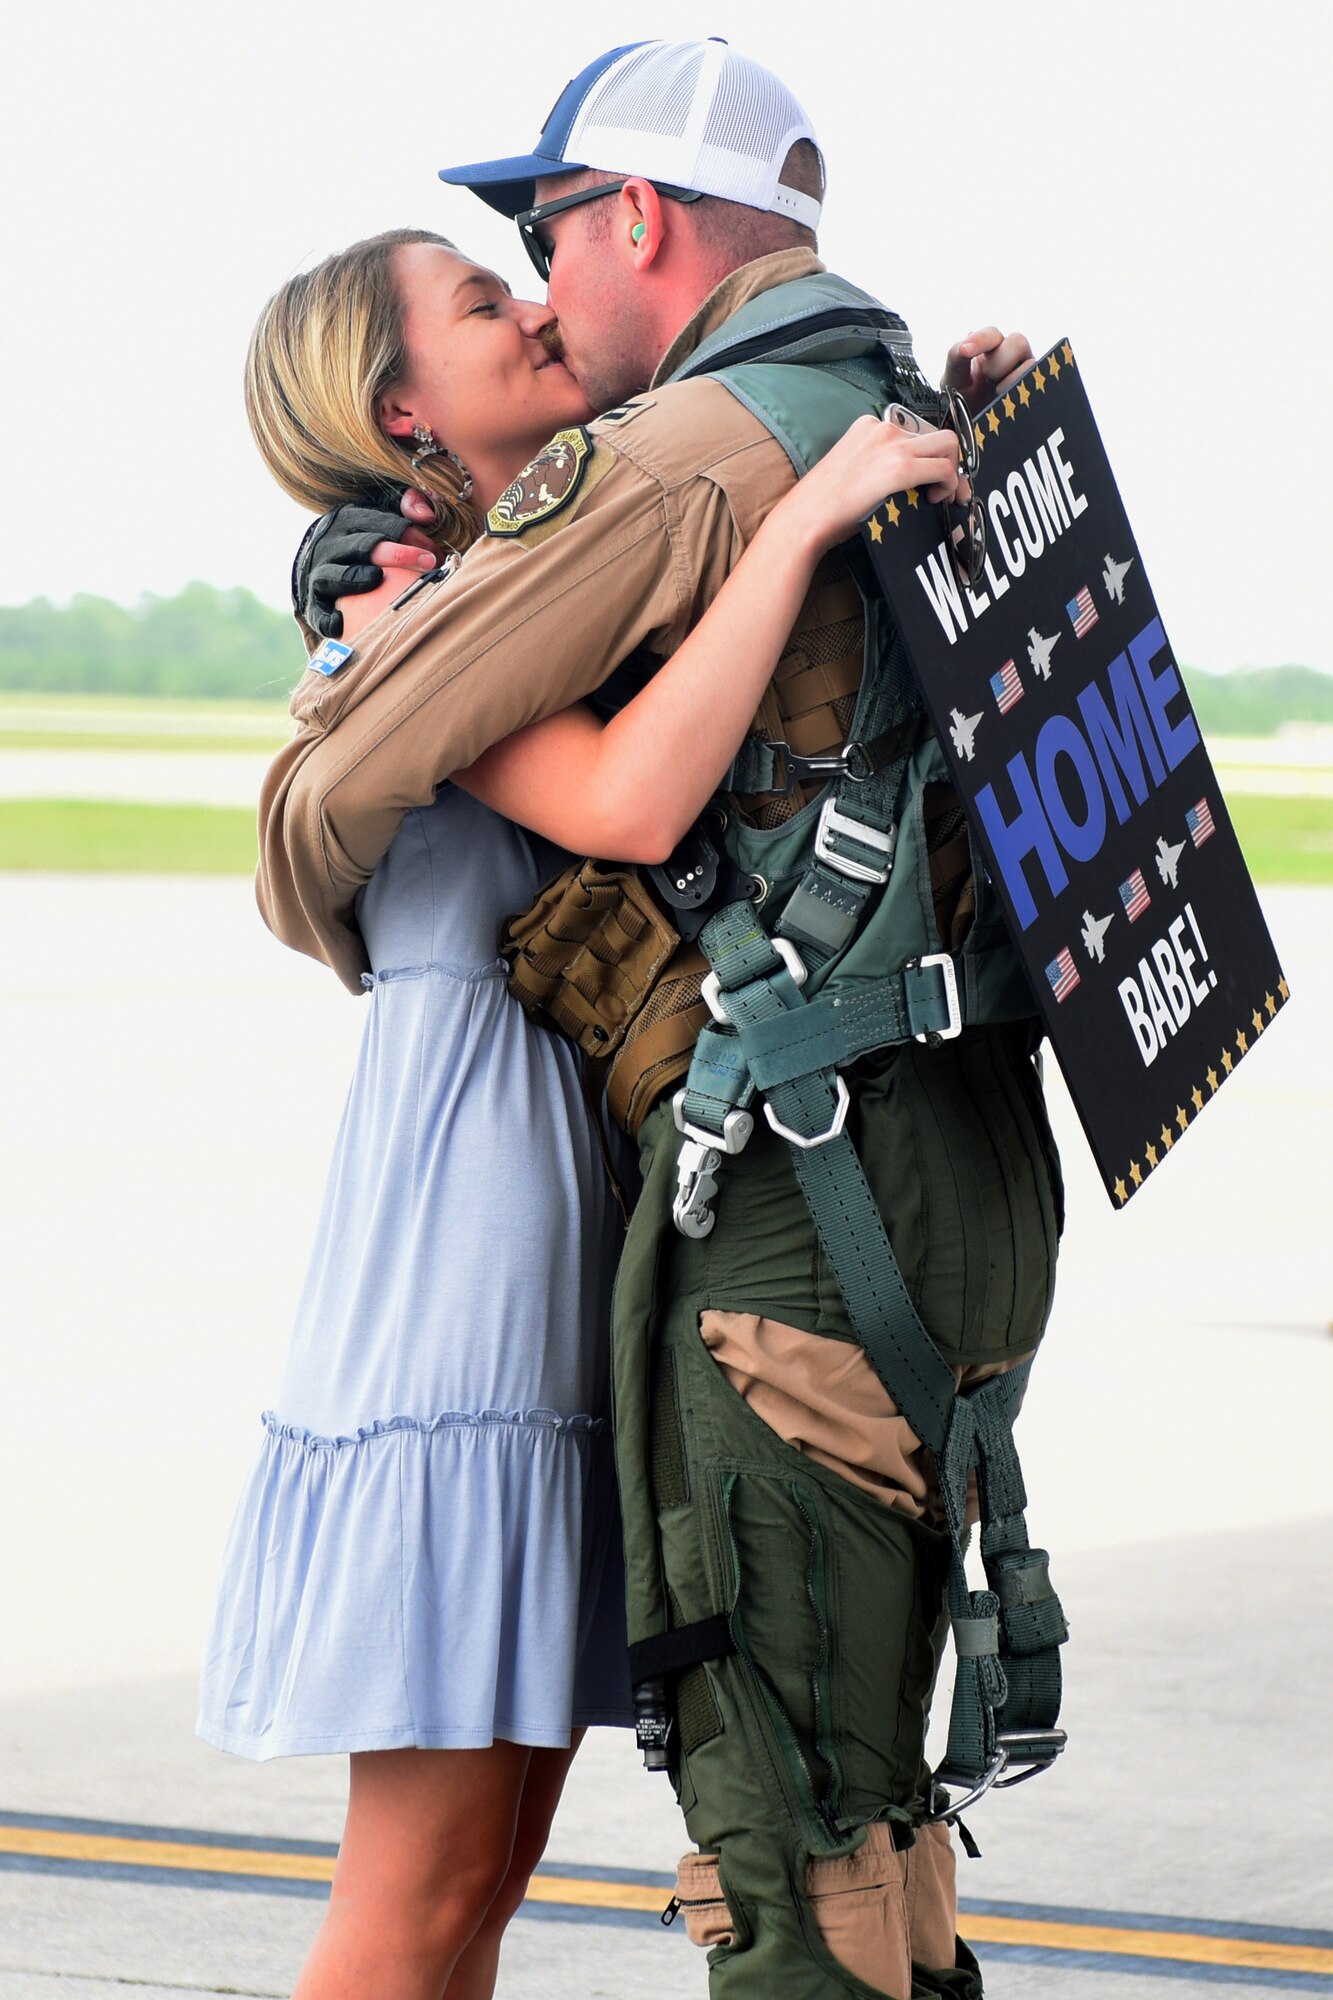 U.S. Air Force Capt. Kaleb Nypaver, a 157th Fighter Squadron pilot, greets his loved one at McEntire Joint National Guard Base, South Carolina, after returning from a deployment to Prince Sultan Air Base, Kingdom of Saudi Arabia, July 16, 2021. “Swamp Fox” Airmen from the South Carolina Air National Guard’s 169th Fighter Wing were deployed to PSAB for the past three months to project combat power and help bolster defensive capabilities against potential threats in the region. (U.S. Air National Guard photo by Senior Airman Mackenzie Bacalzo, 169th Fighter Wing Public Affairs)